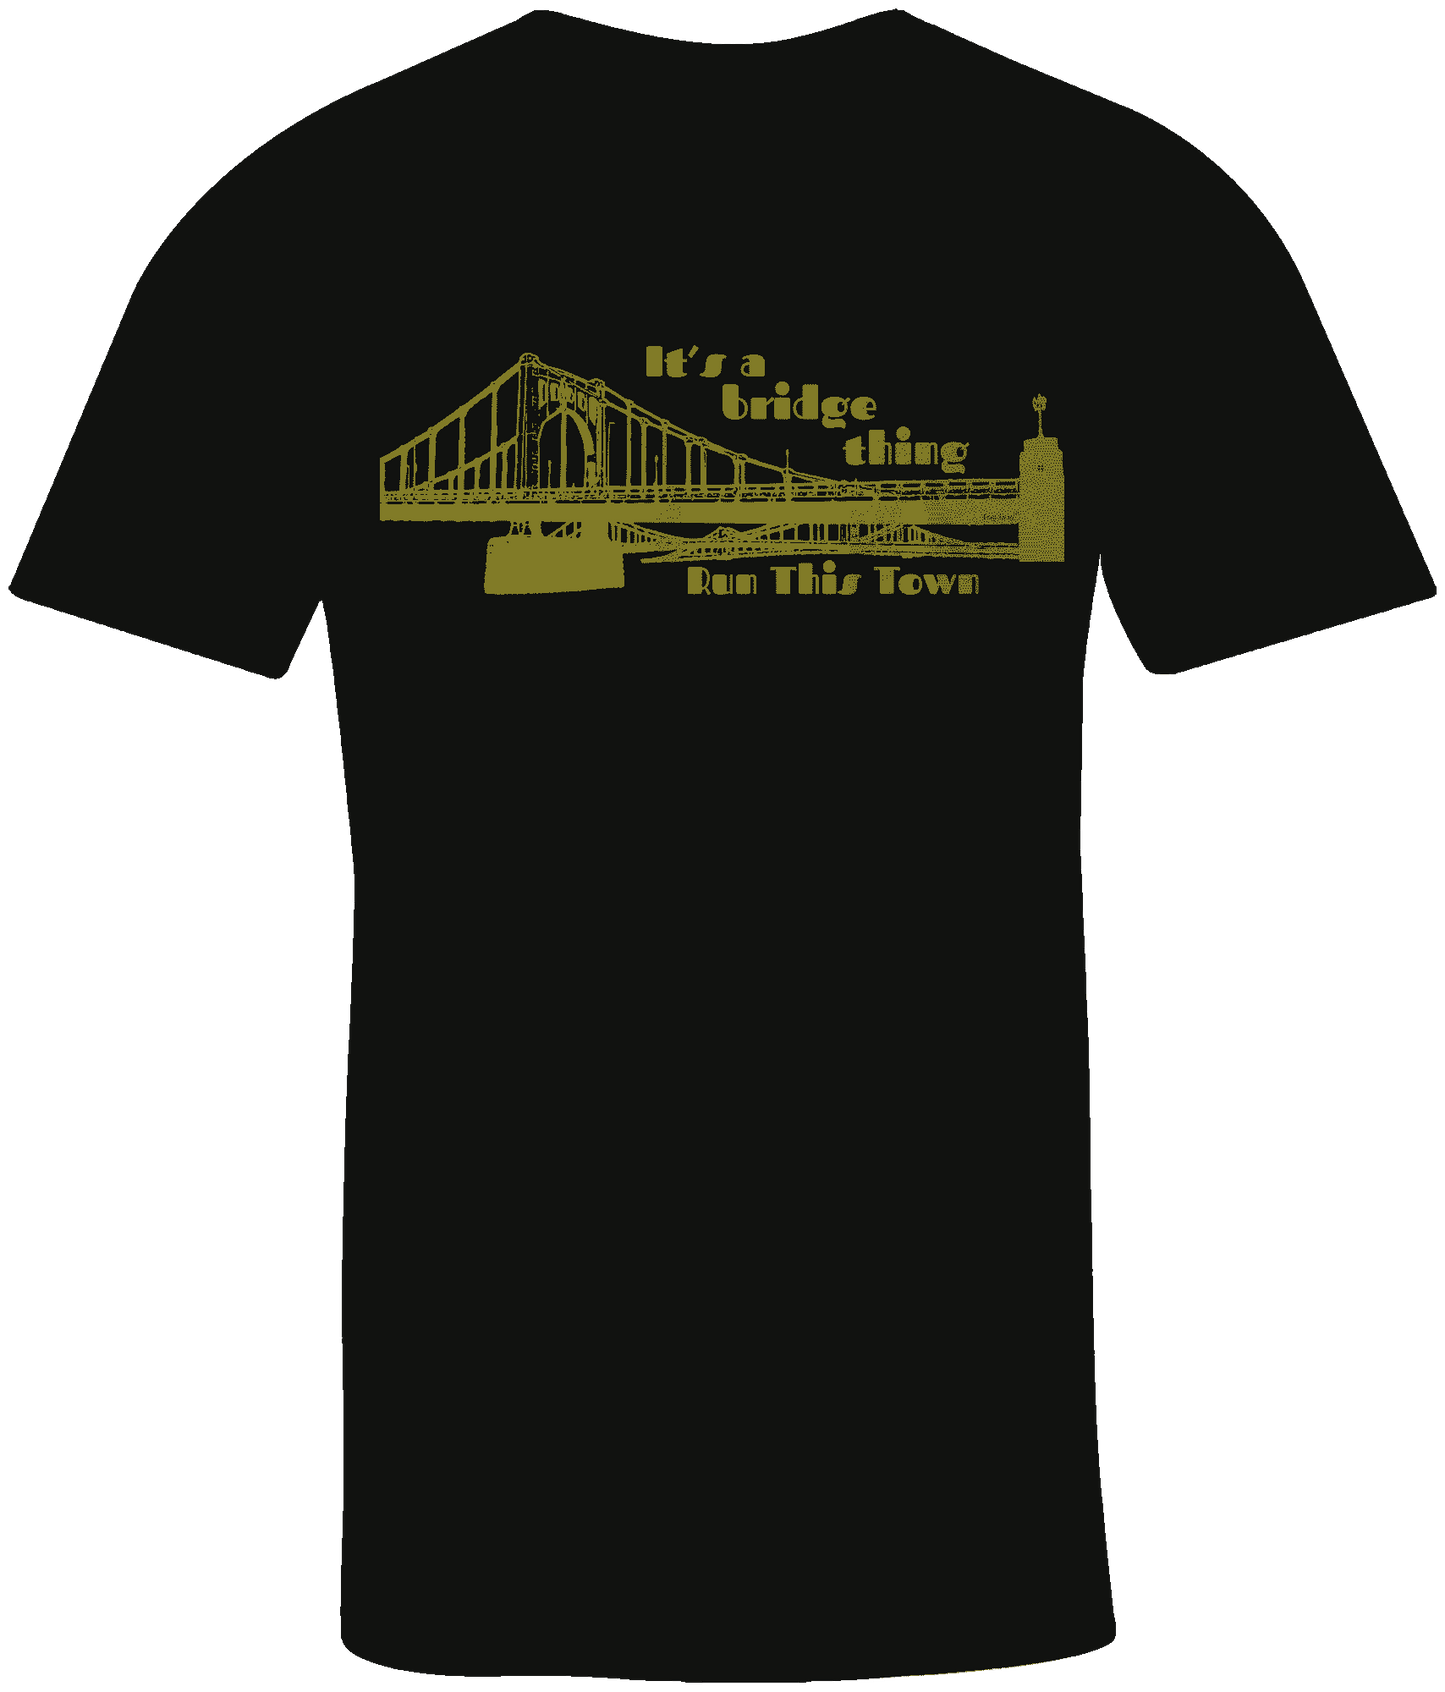 Unisex black crew neck t-shirt with gold distressed graphic image of a bridge text it's a bridge thing above the bridge, text run this town below the bridge 